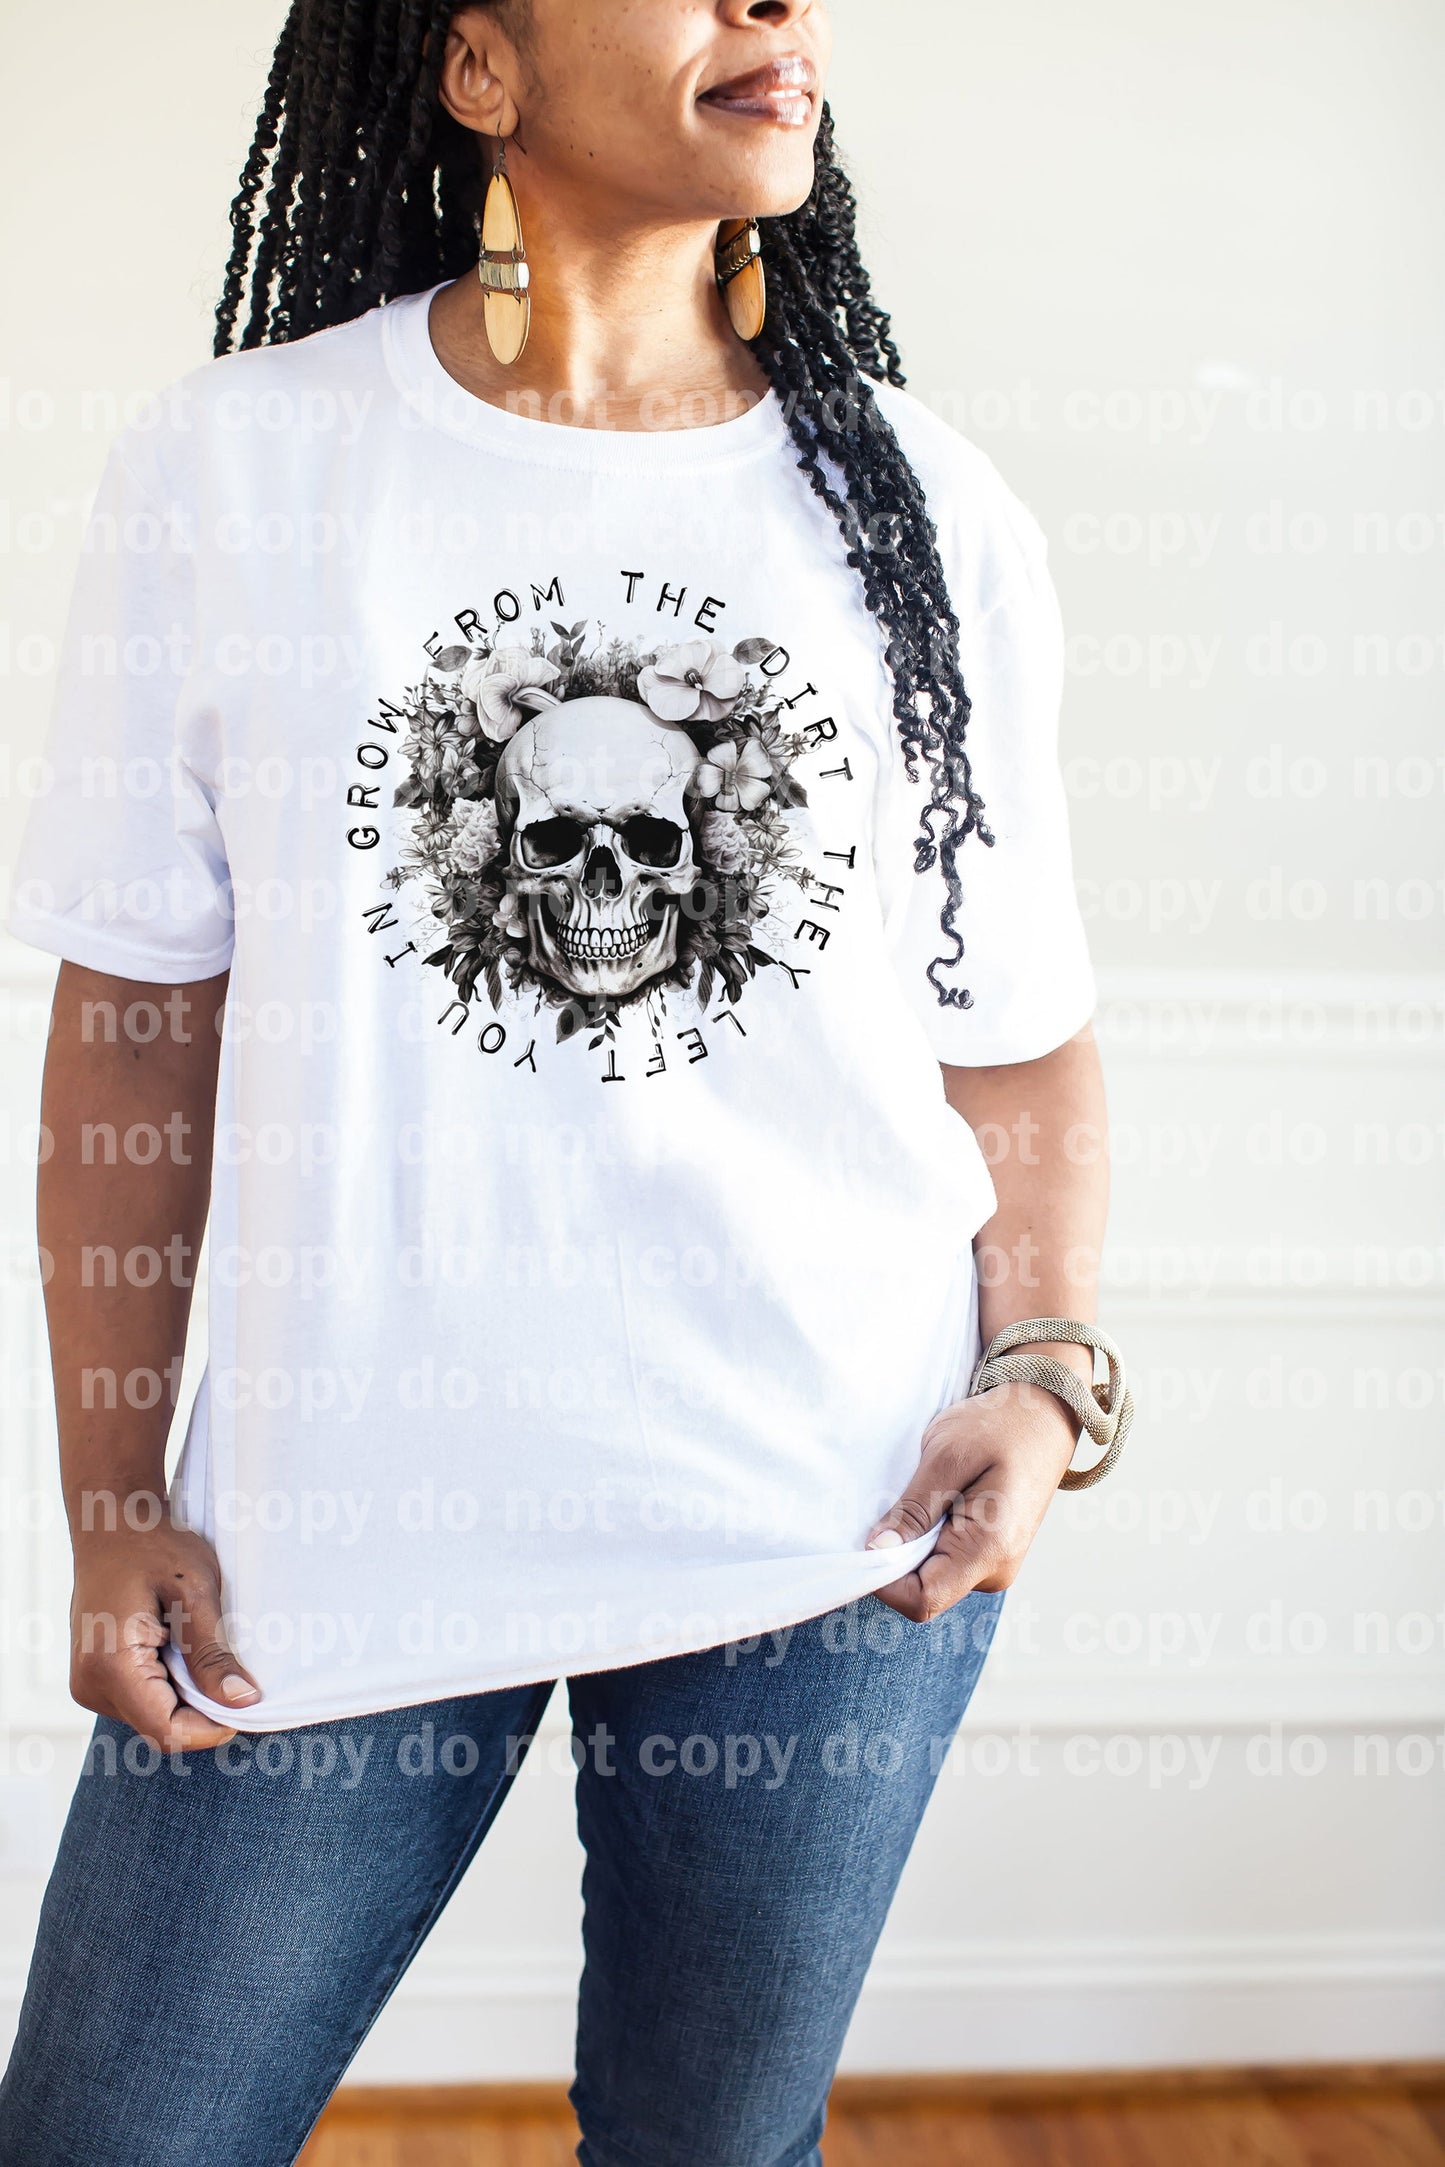 Grow From The Dirt They Left You In with Pocket Option Dream Print or Sublimation Print